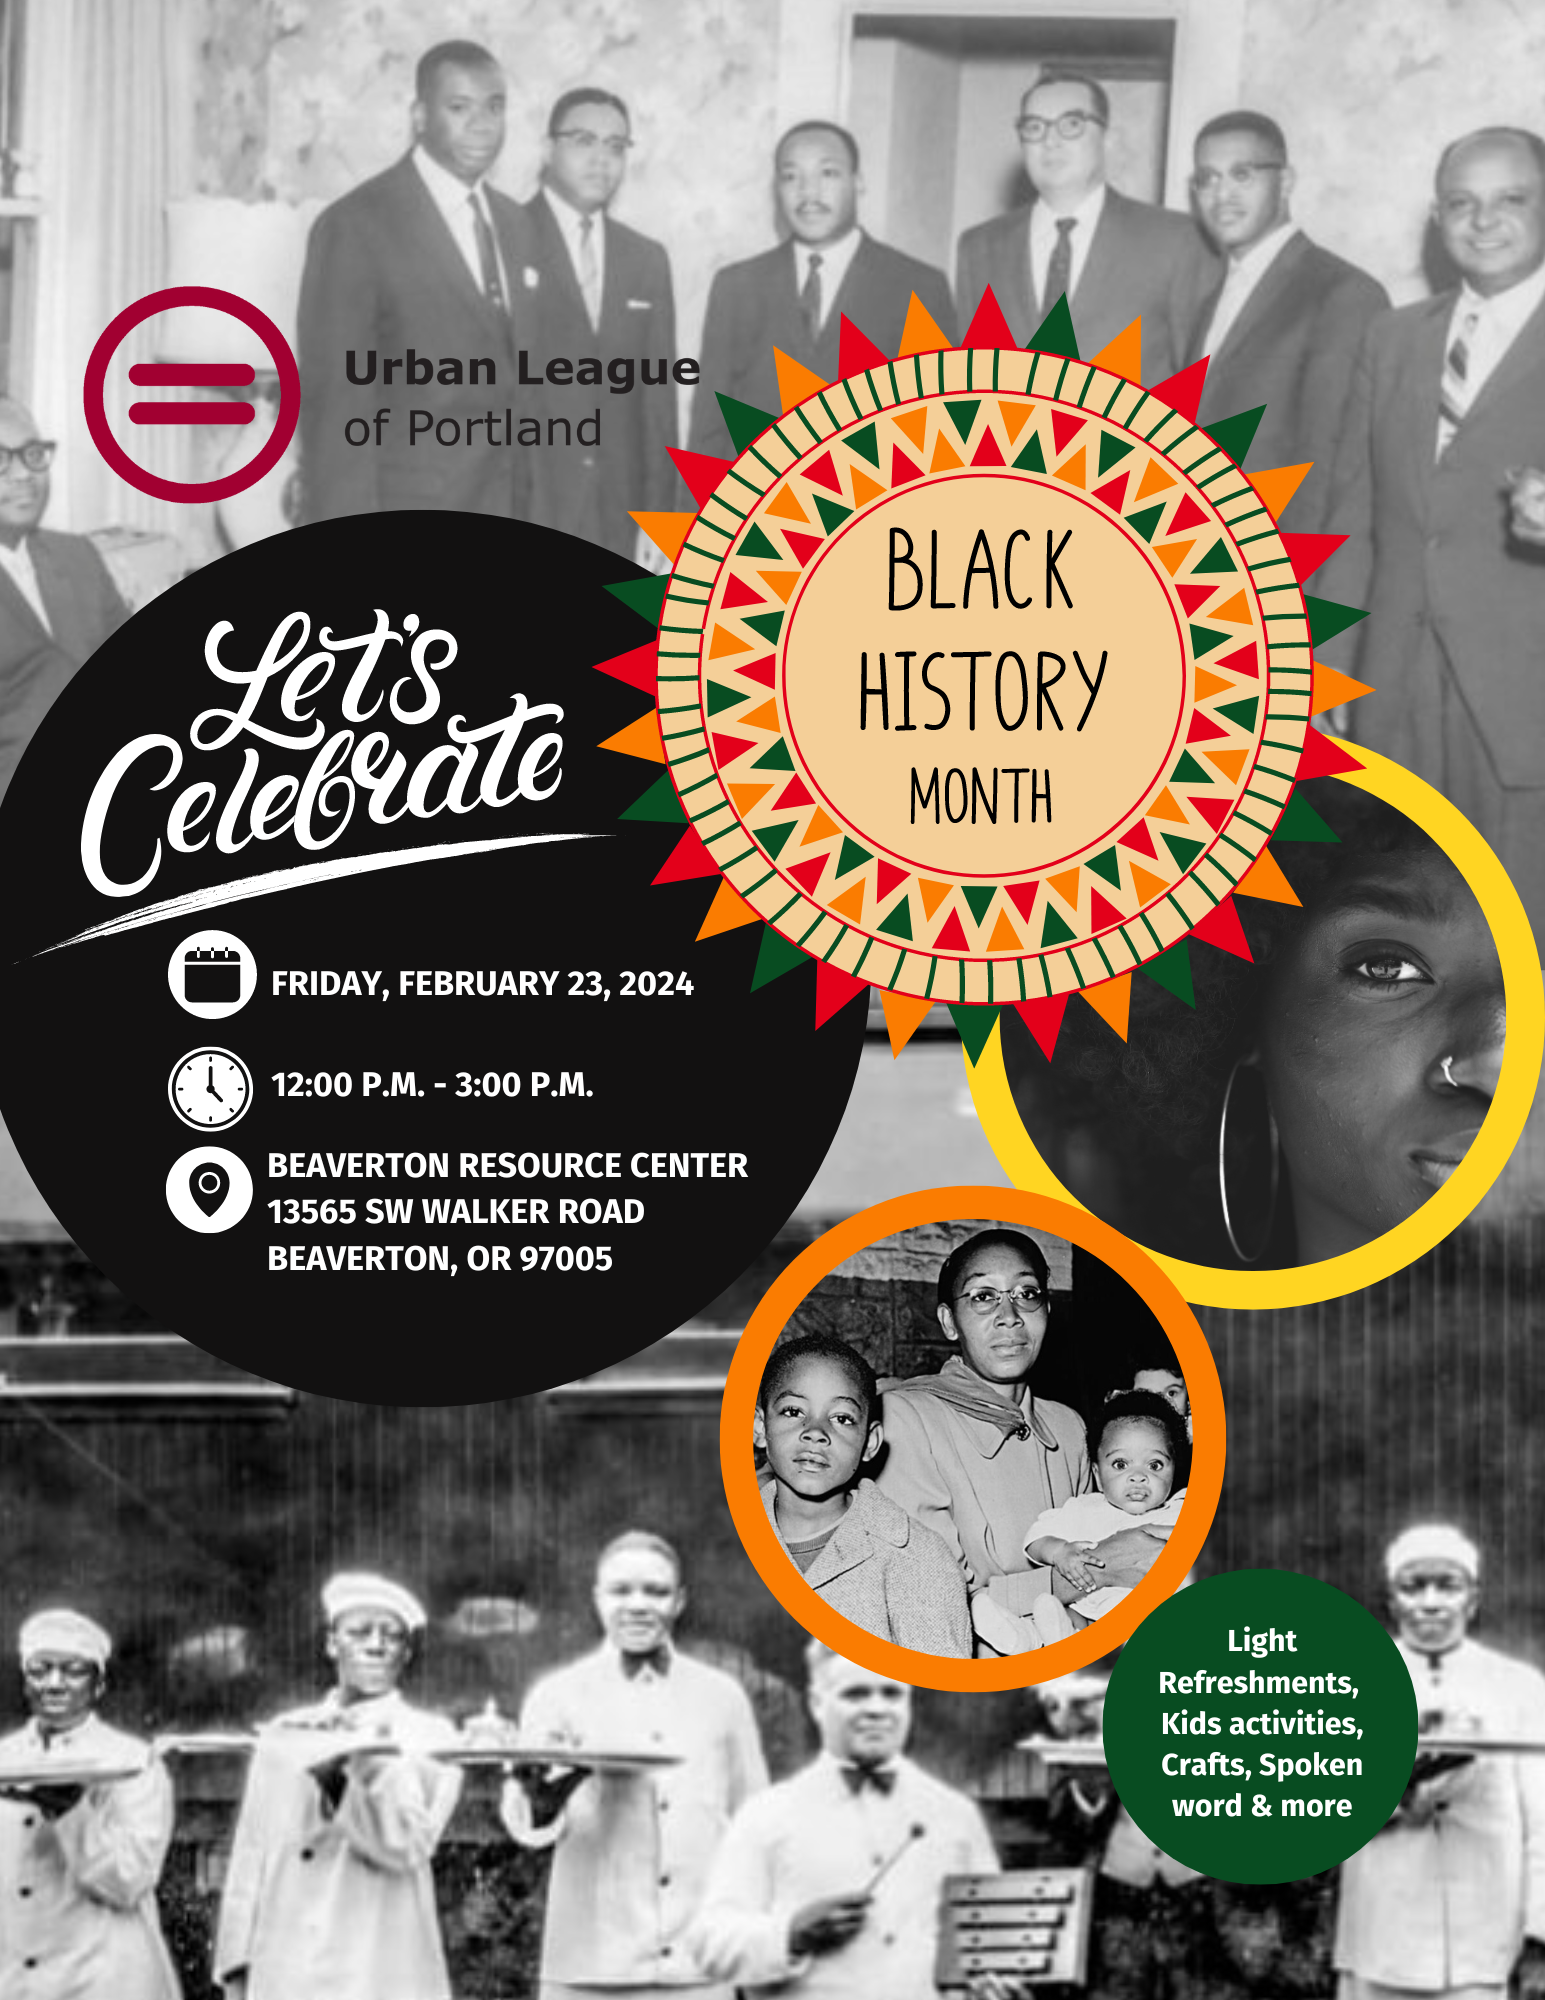 Flyer for UL Black History Month Event with Photos and info